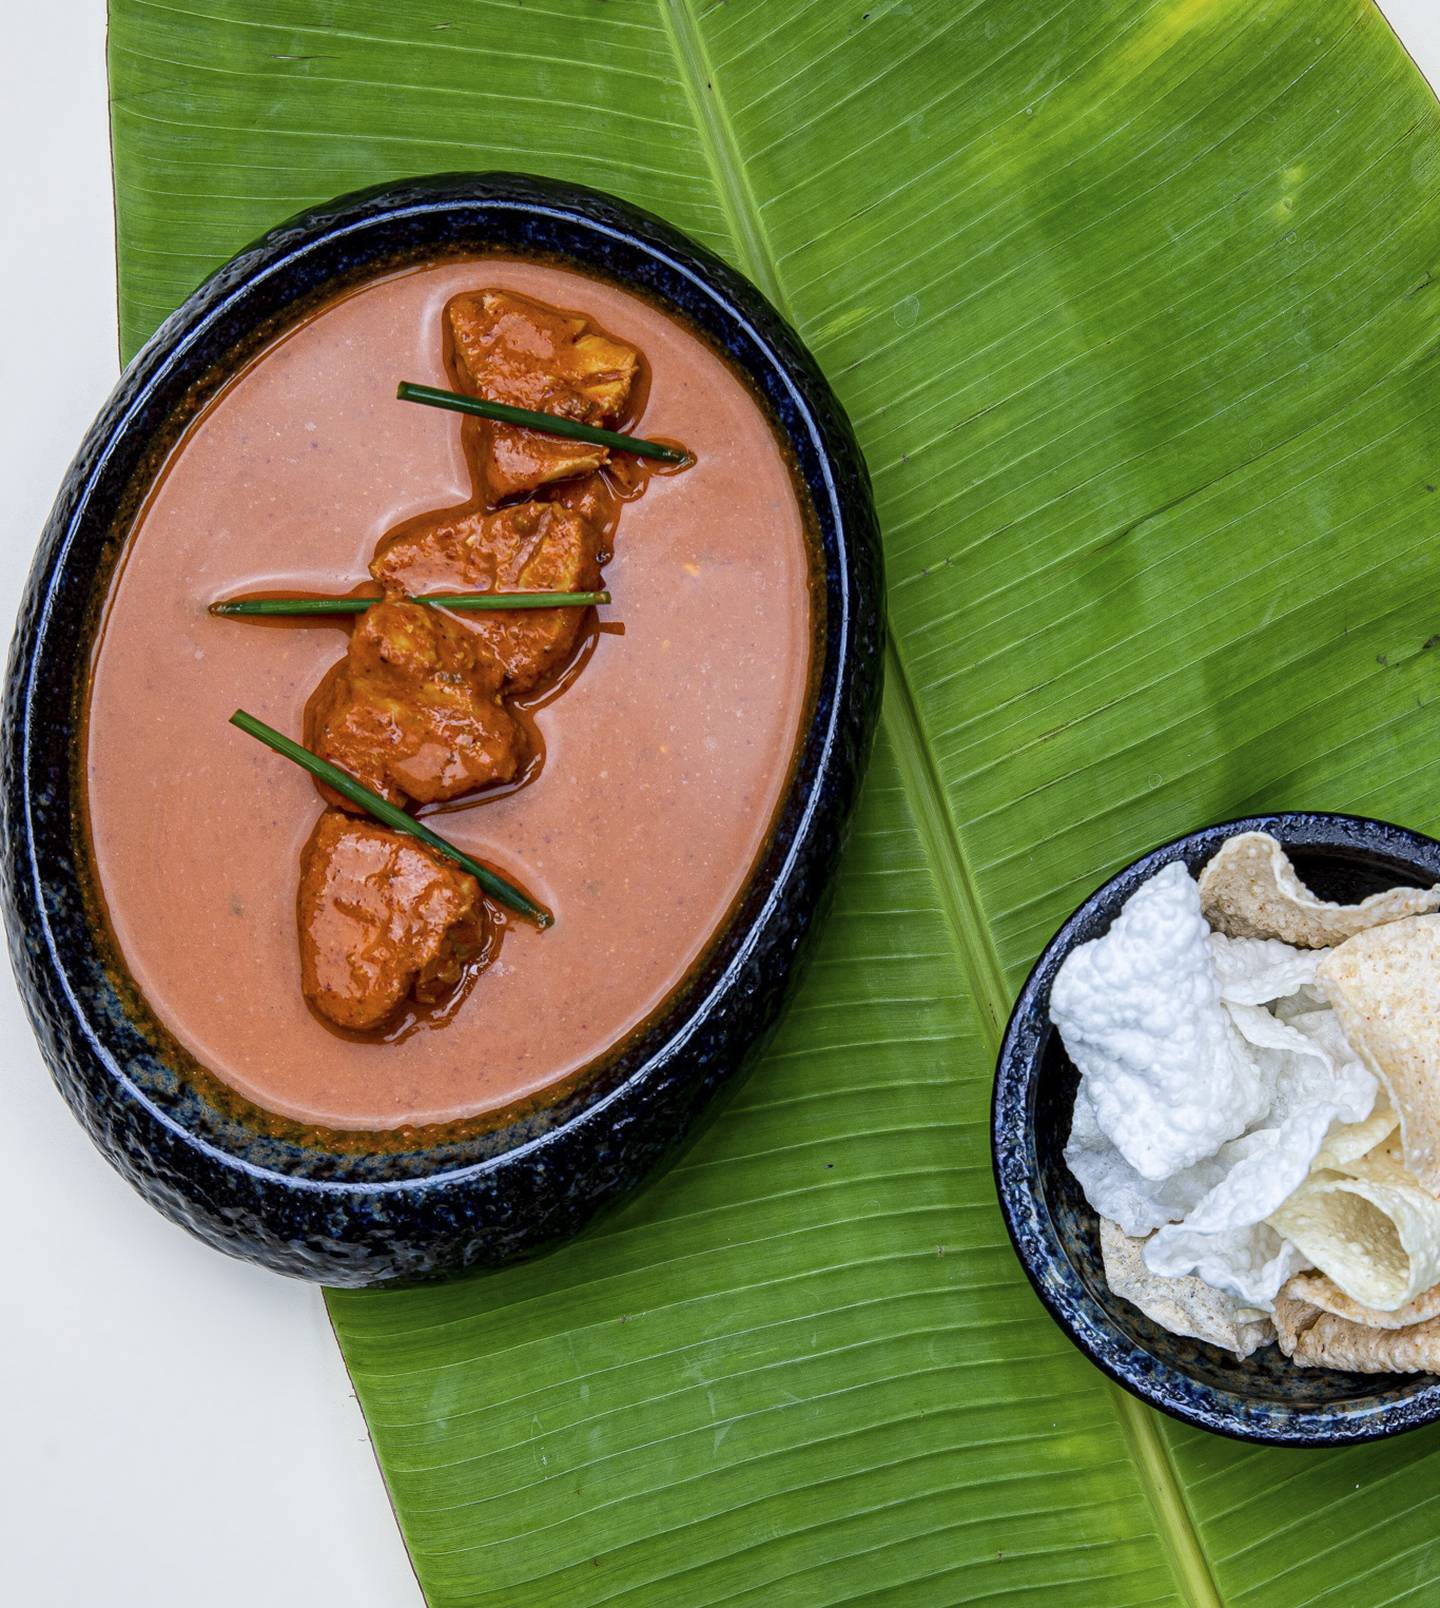 A combination of spices and coconut milk in the fish curry render it hot but flavourful. Photo: Curry Castle